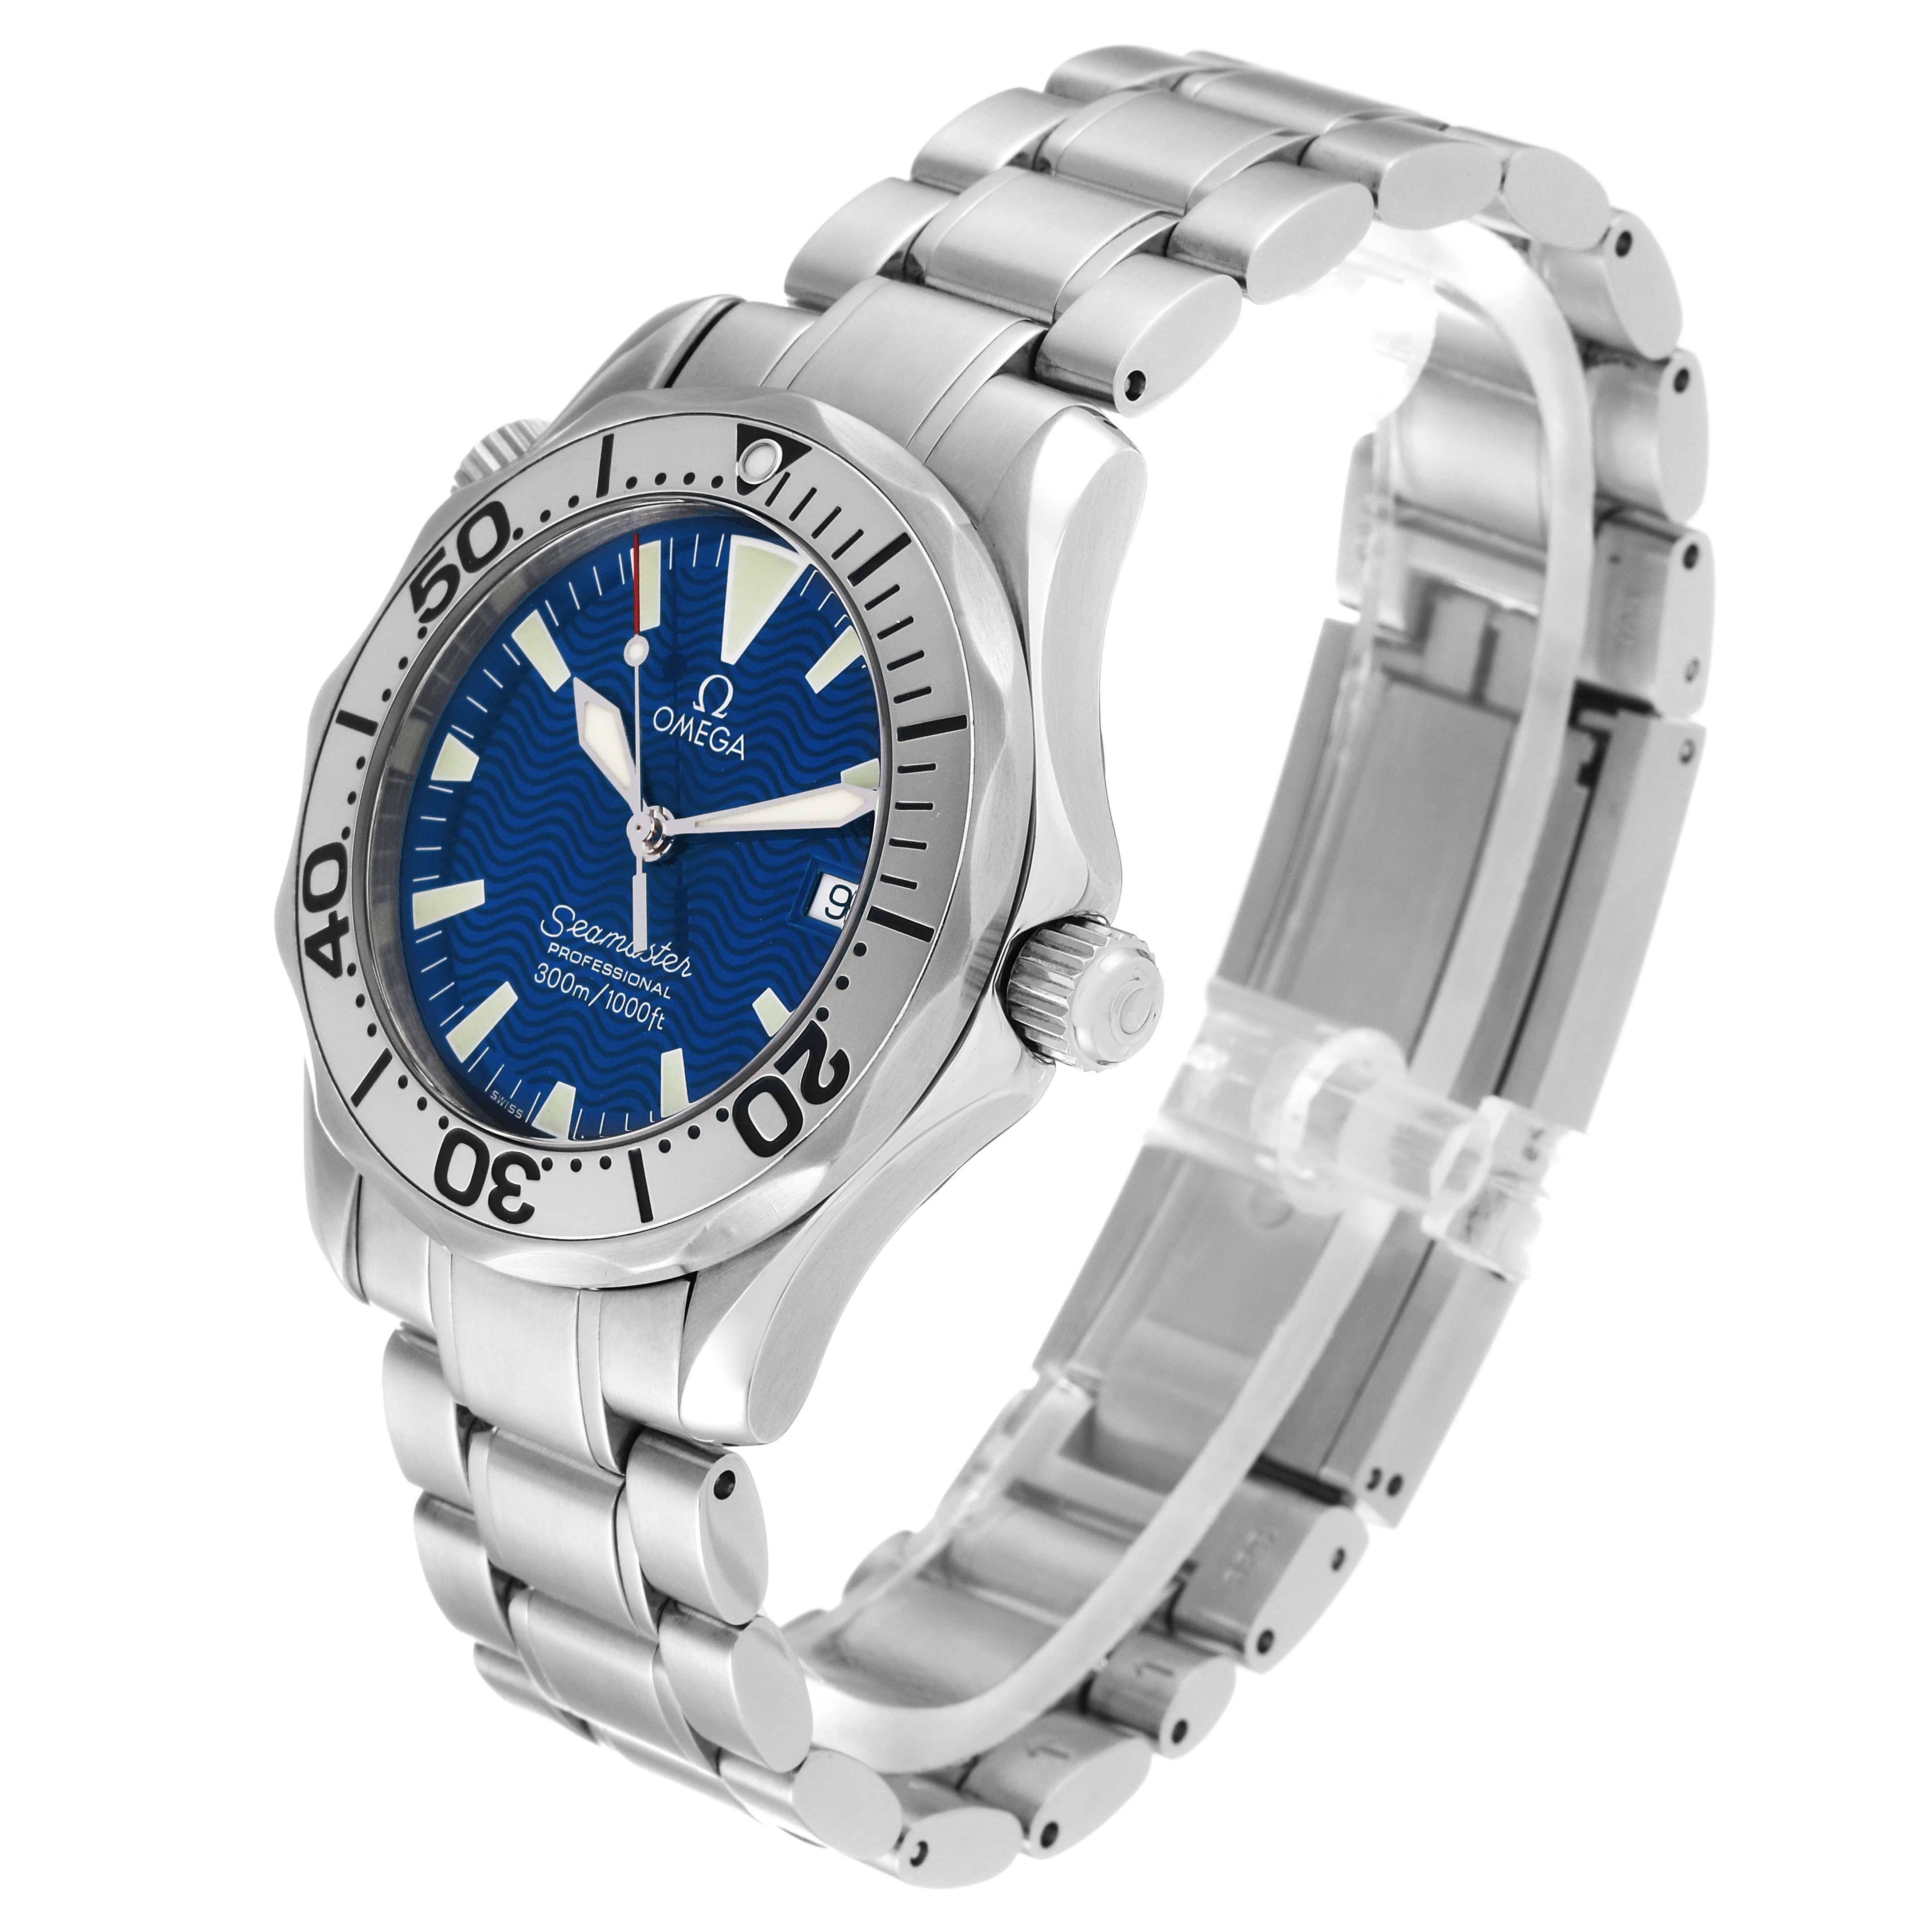 Omega Seamaster Electric Blue Wave Dial Midsize Steel Mens Watch 2263.80.00 3